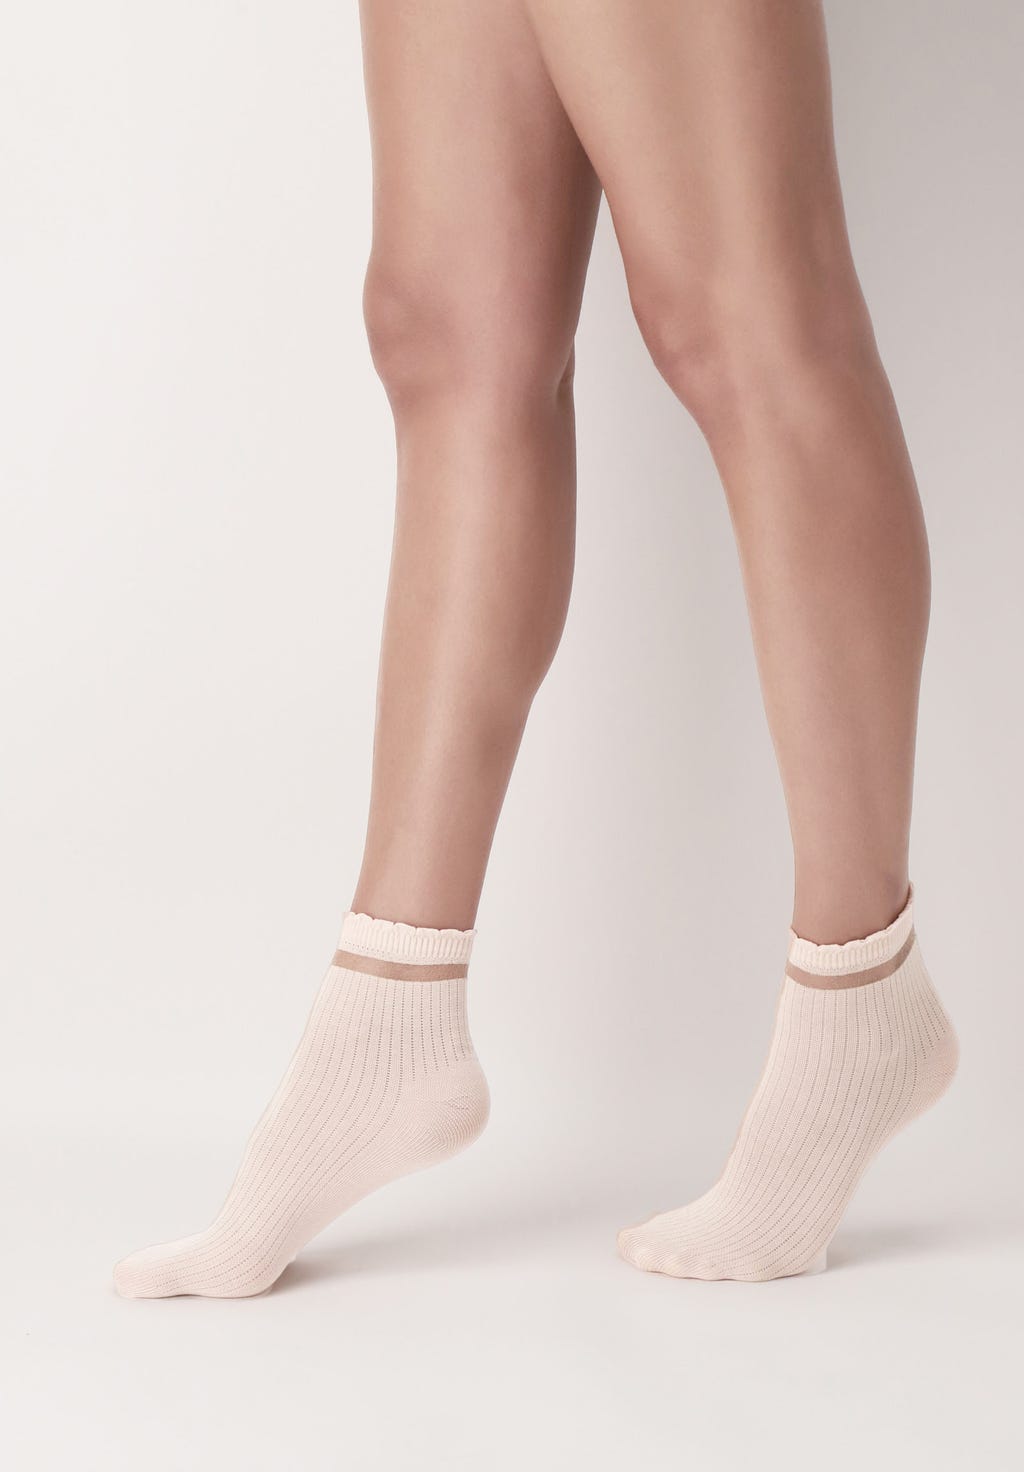 OroblÌ_ Gentle Sock - Light peach (powder) ribbed cotton fashion ankle socks with a sheer striped cuff and scalloped edge.